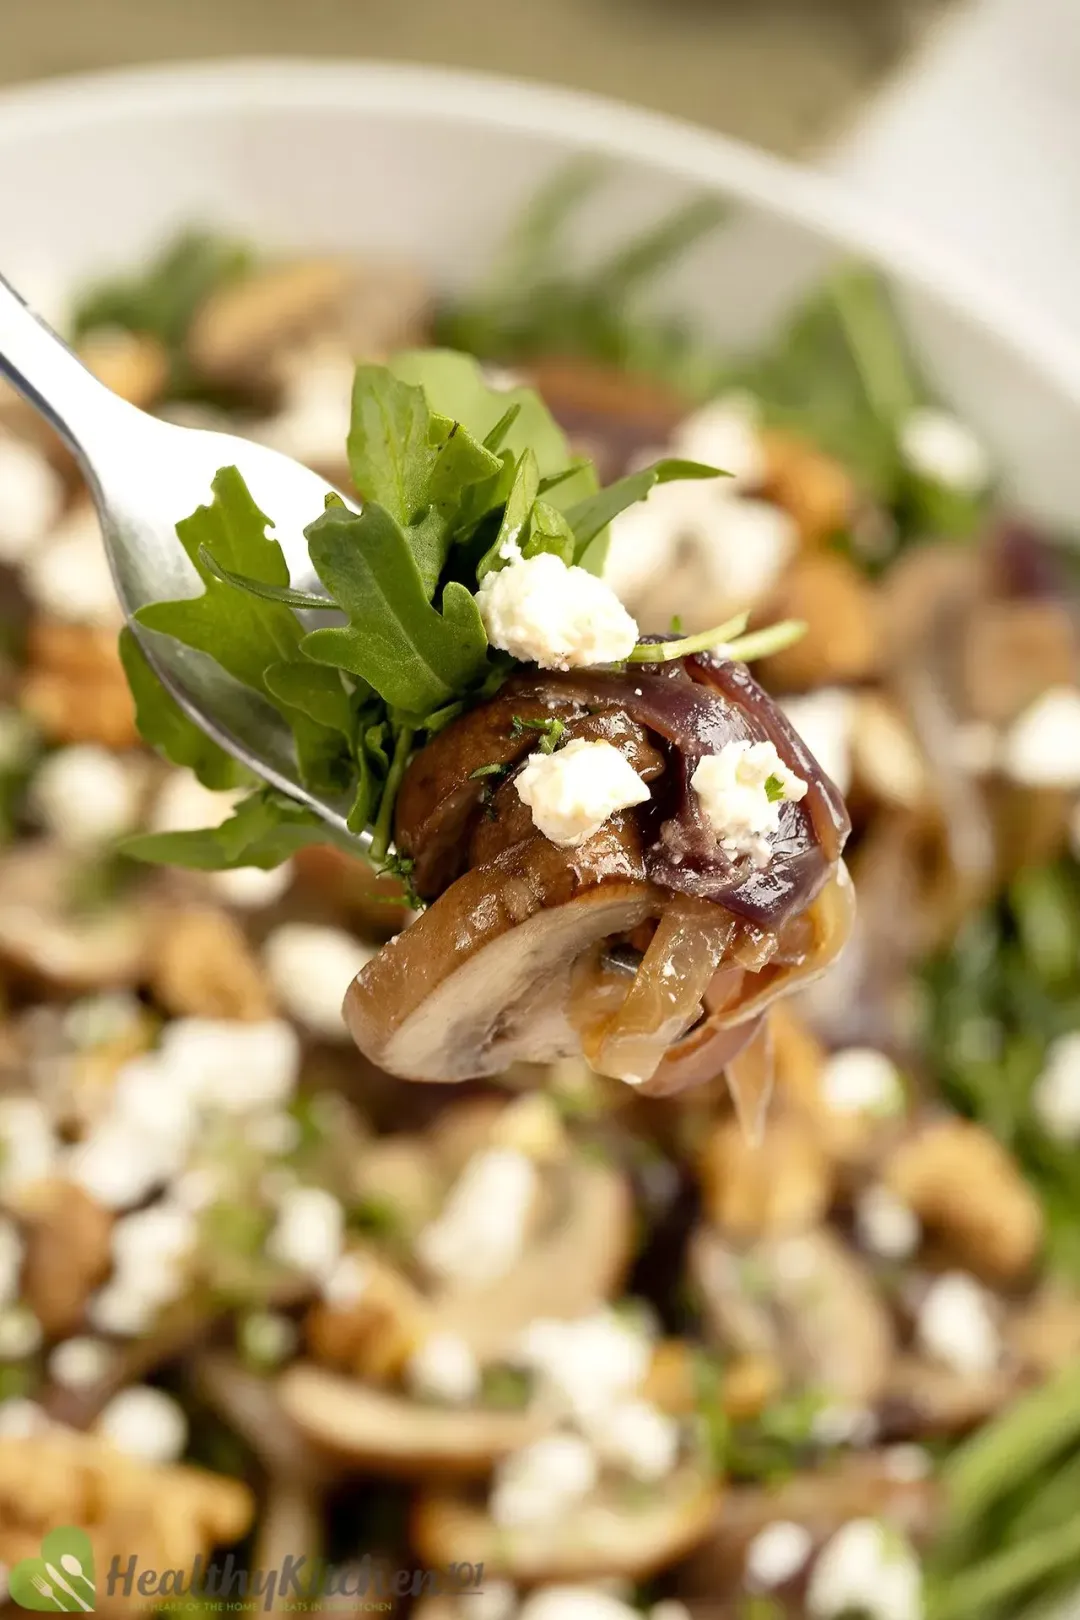 A close-up photo of a fork piercin through arugula mushroom salad with feta cheese, hovering over a bowl of salad